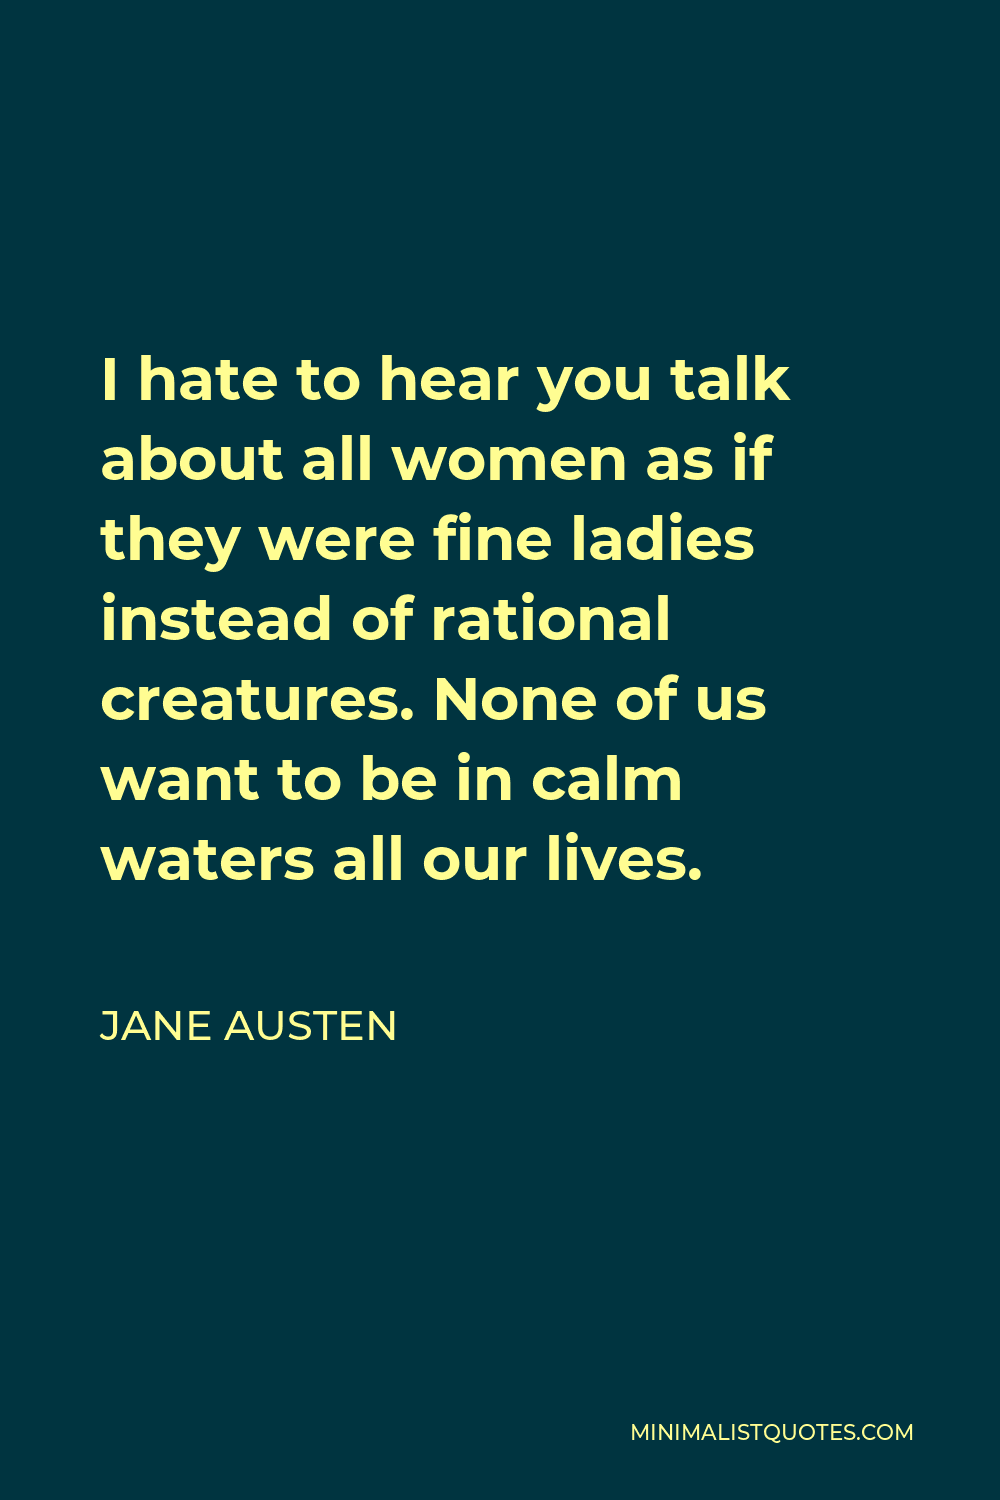 Jane Austen Quote - I hate to hear you talk about all women as if they were fine ladies instead of rational creatures. None of us want to be in calm waters all our lives.